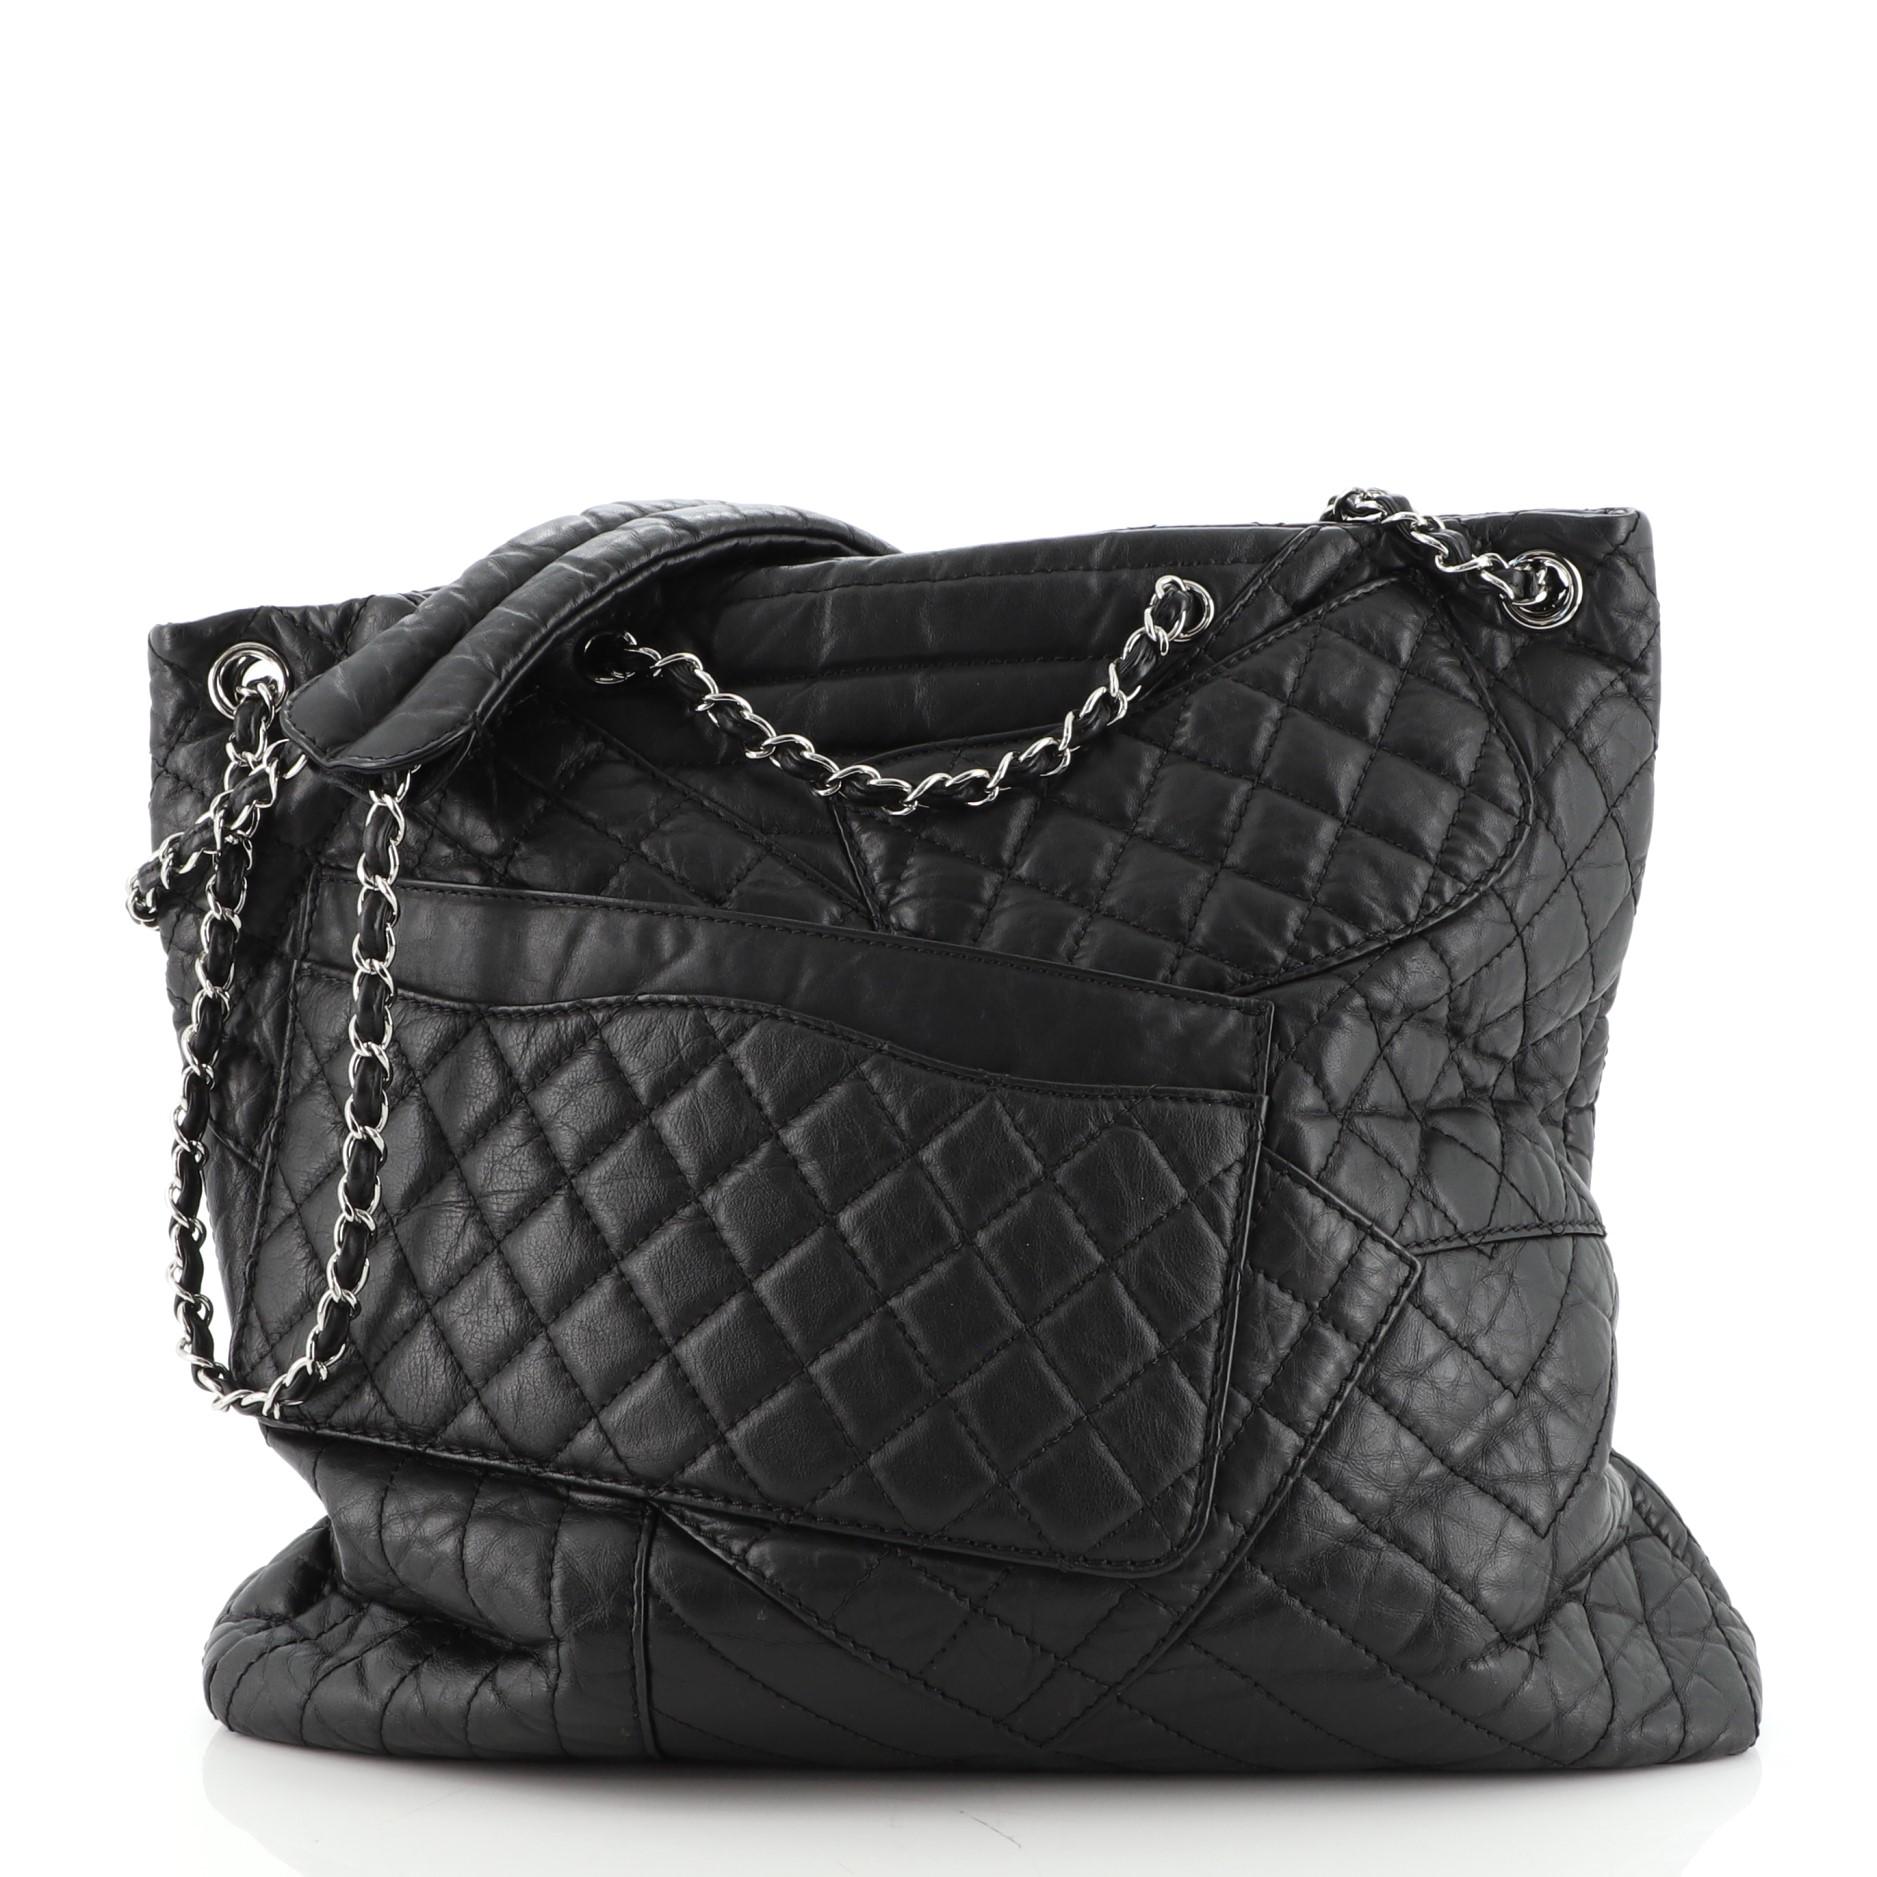 Black Chanel Karl's Fantasy Cabas Tote Quilted Leather Medium